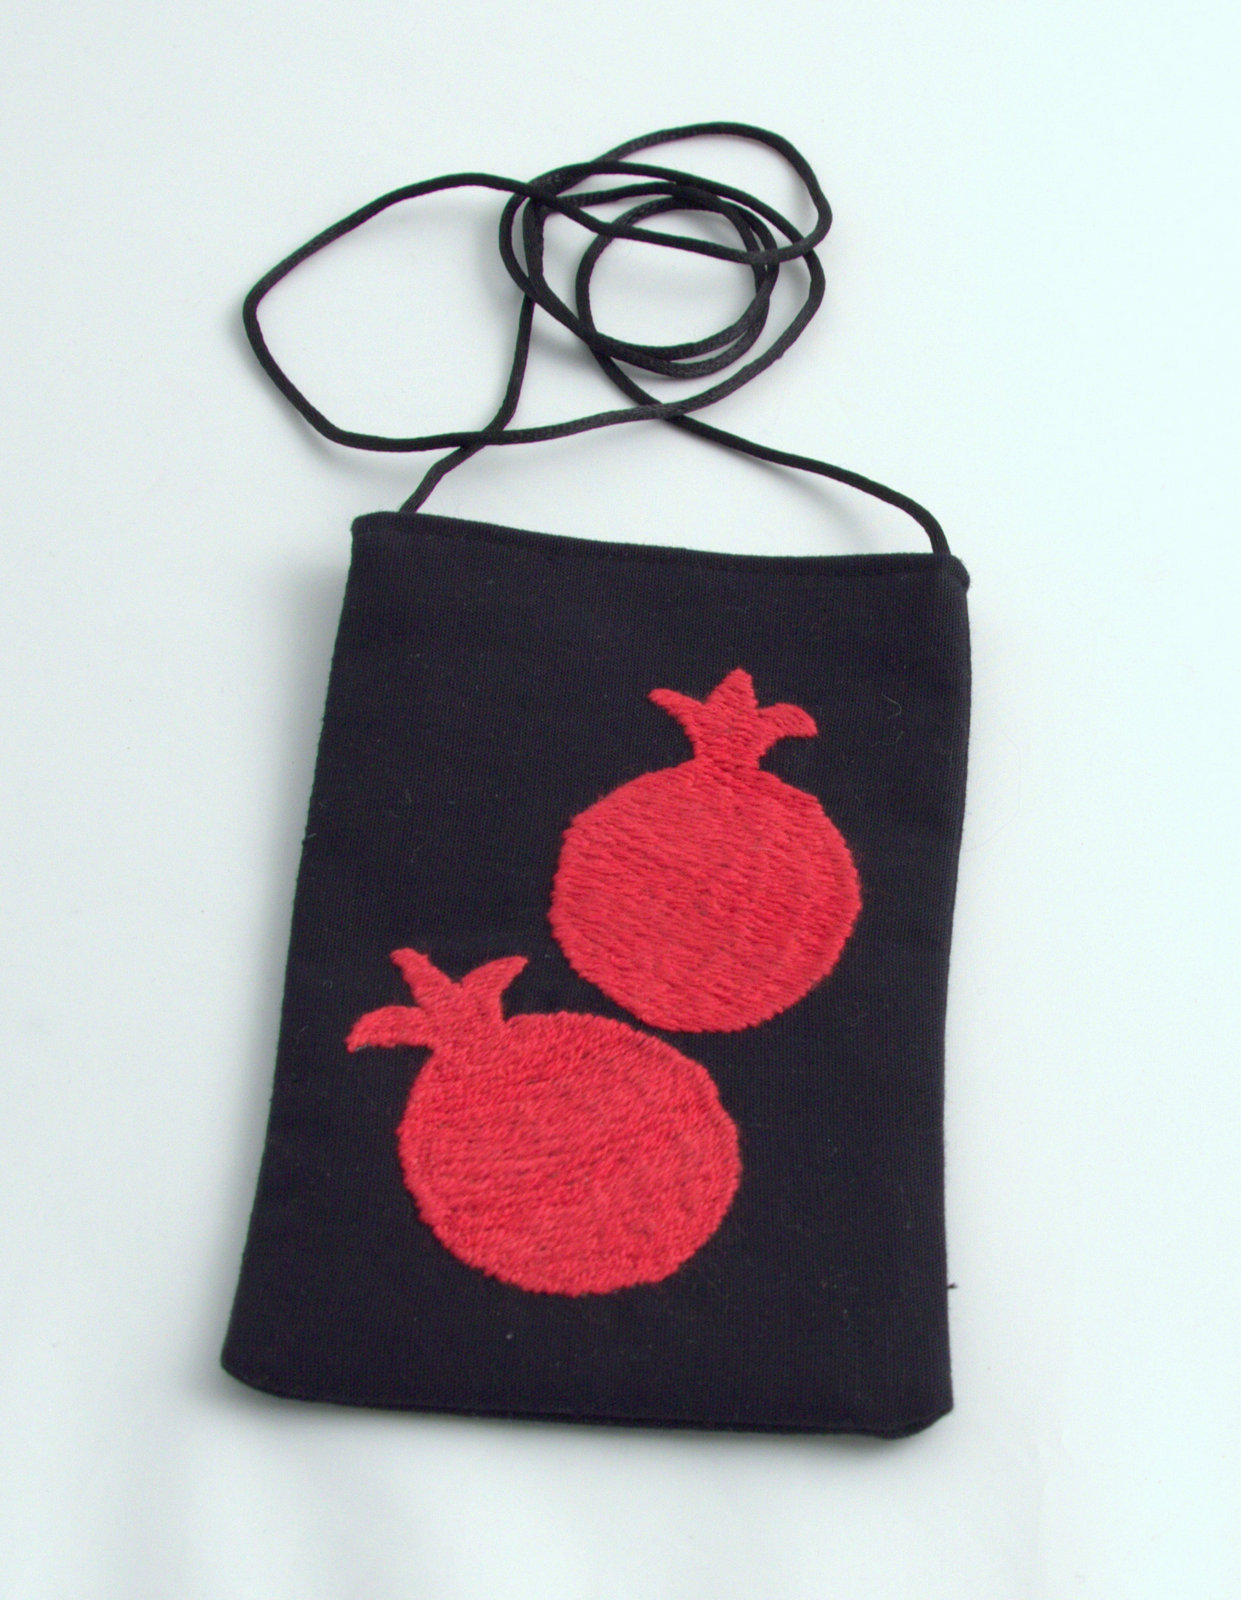 mobile phone pouch - hand-embroidered - Tajikistan - women's cooperative